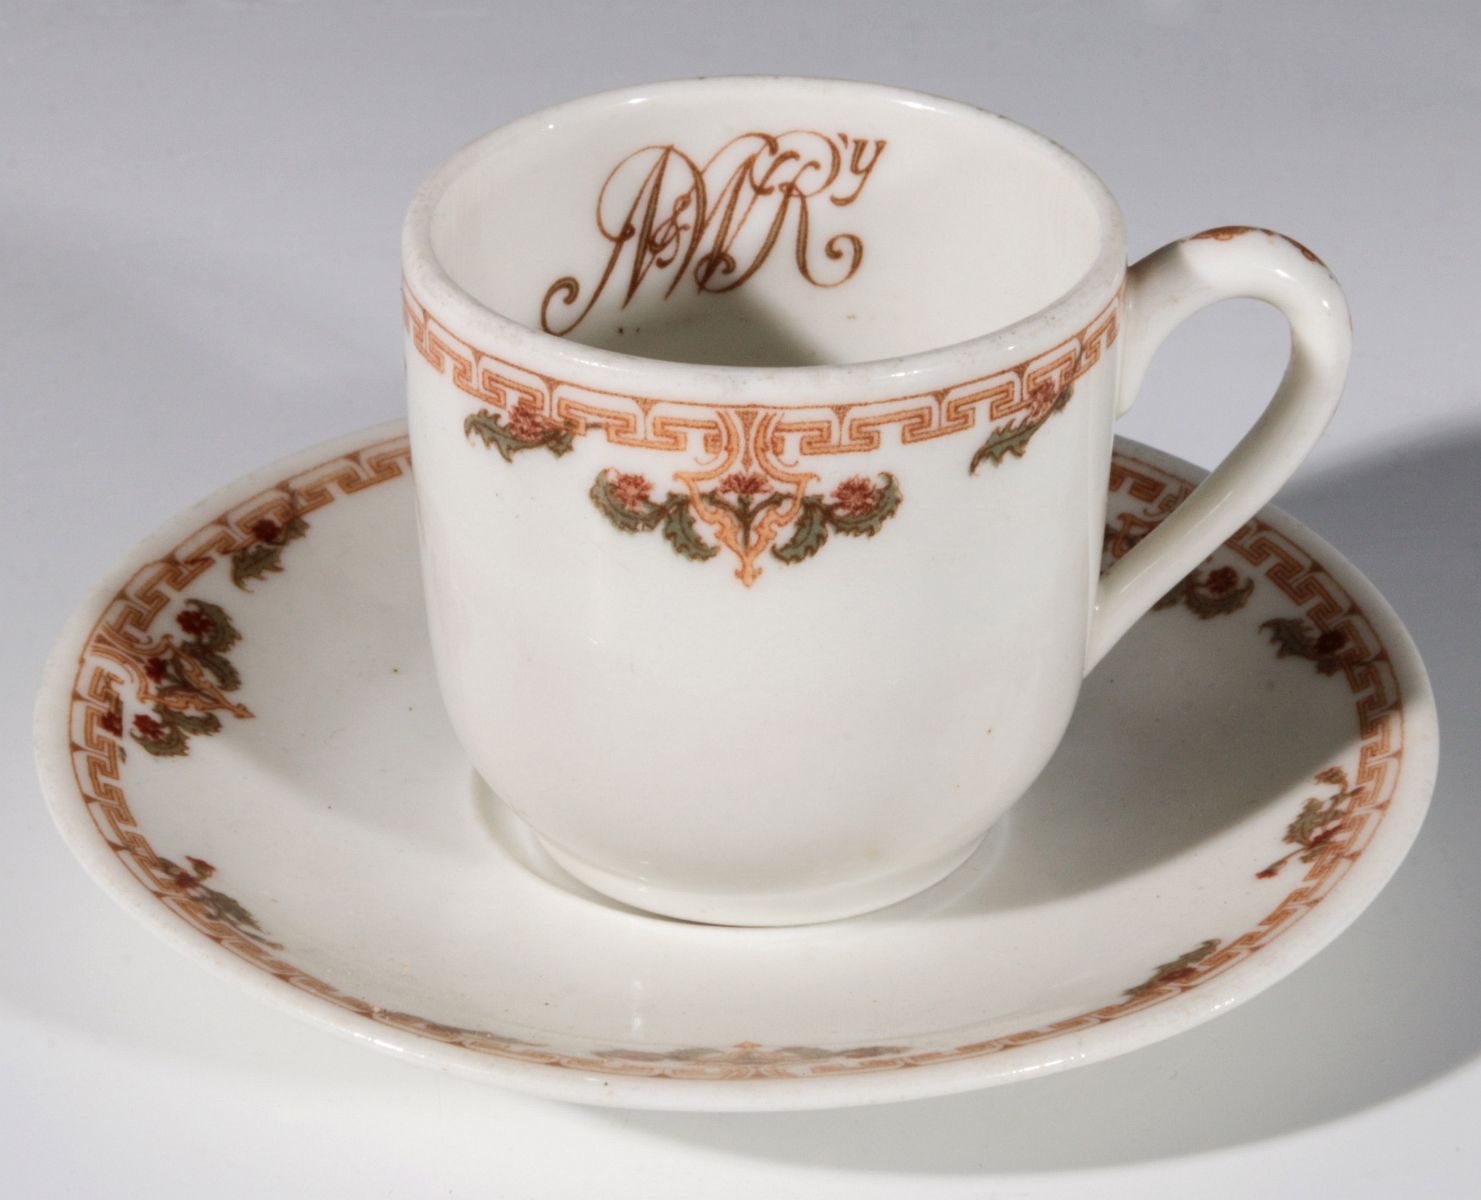 RARE EARLY NORFOLK & WESTERN DEMITASSE CUP SAUCER